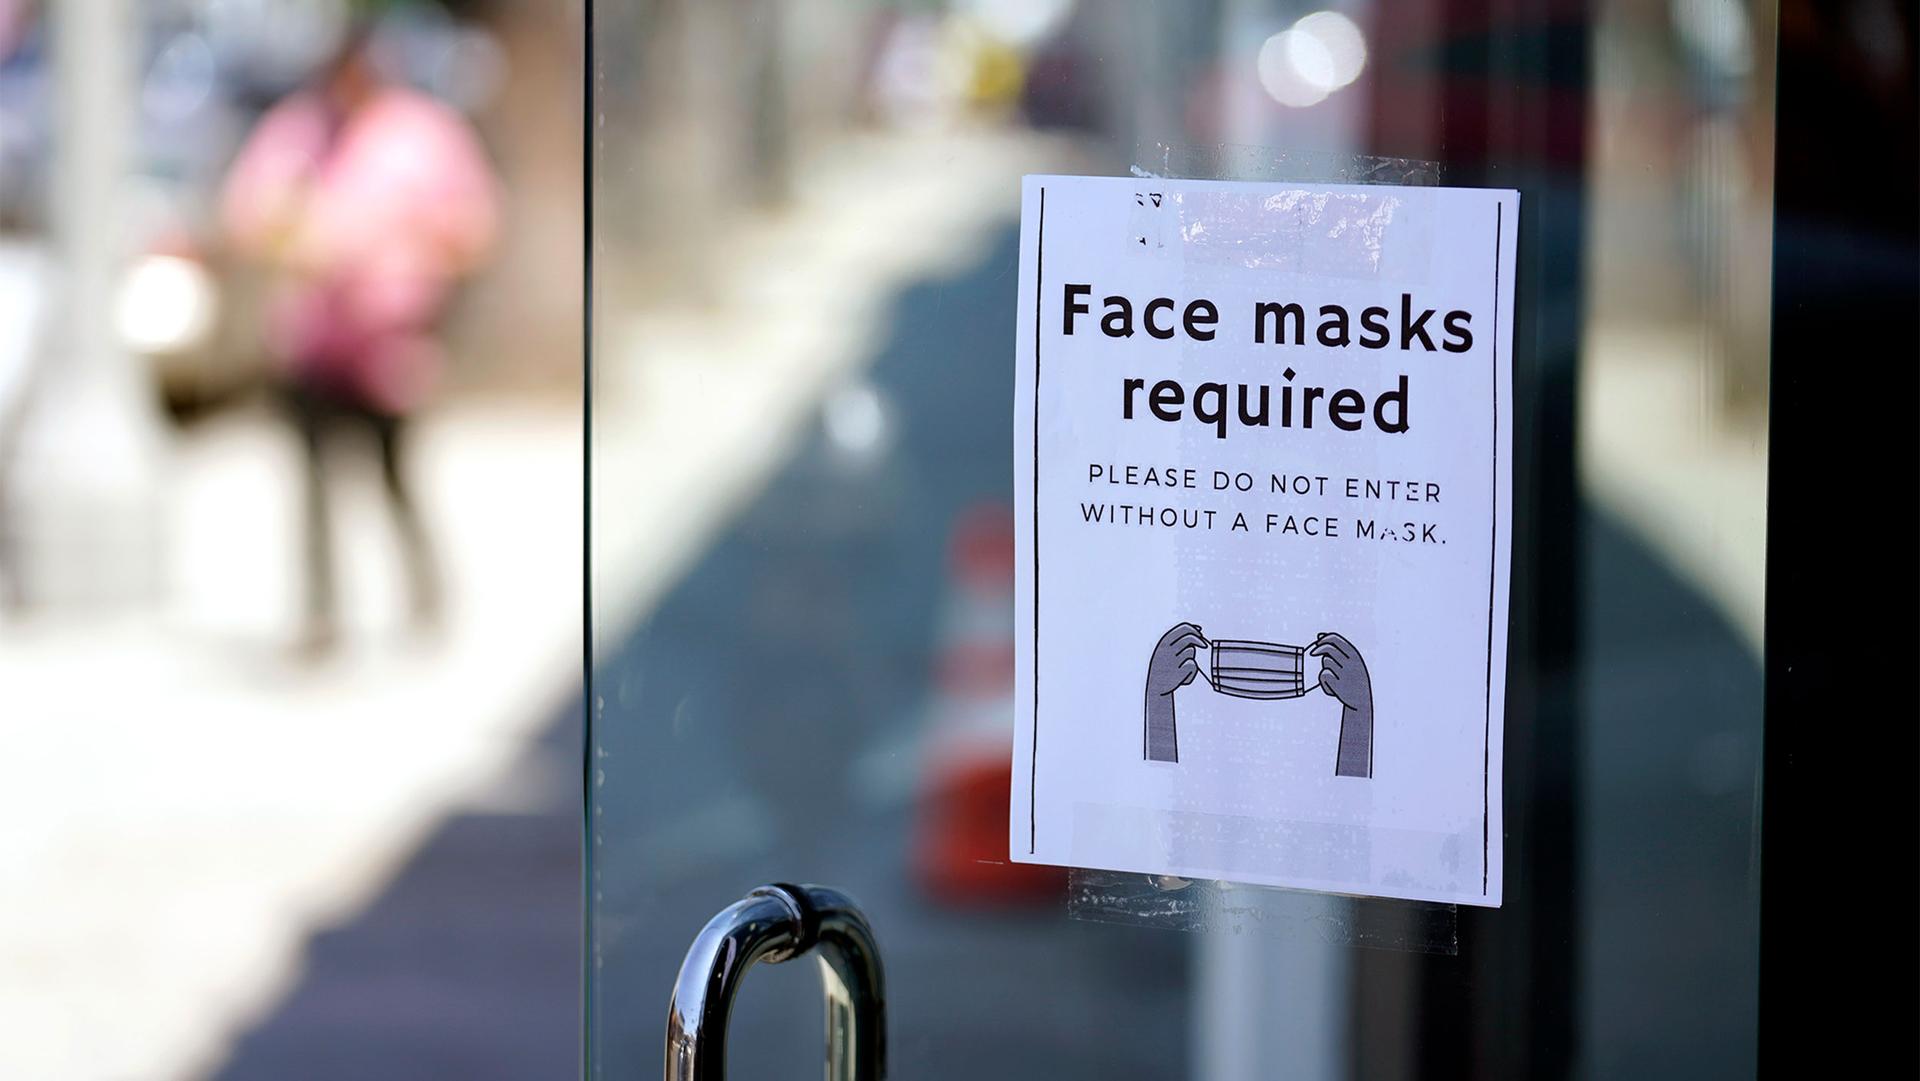 Door with a "face masks required" sign and a person blurred in the distance